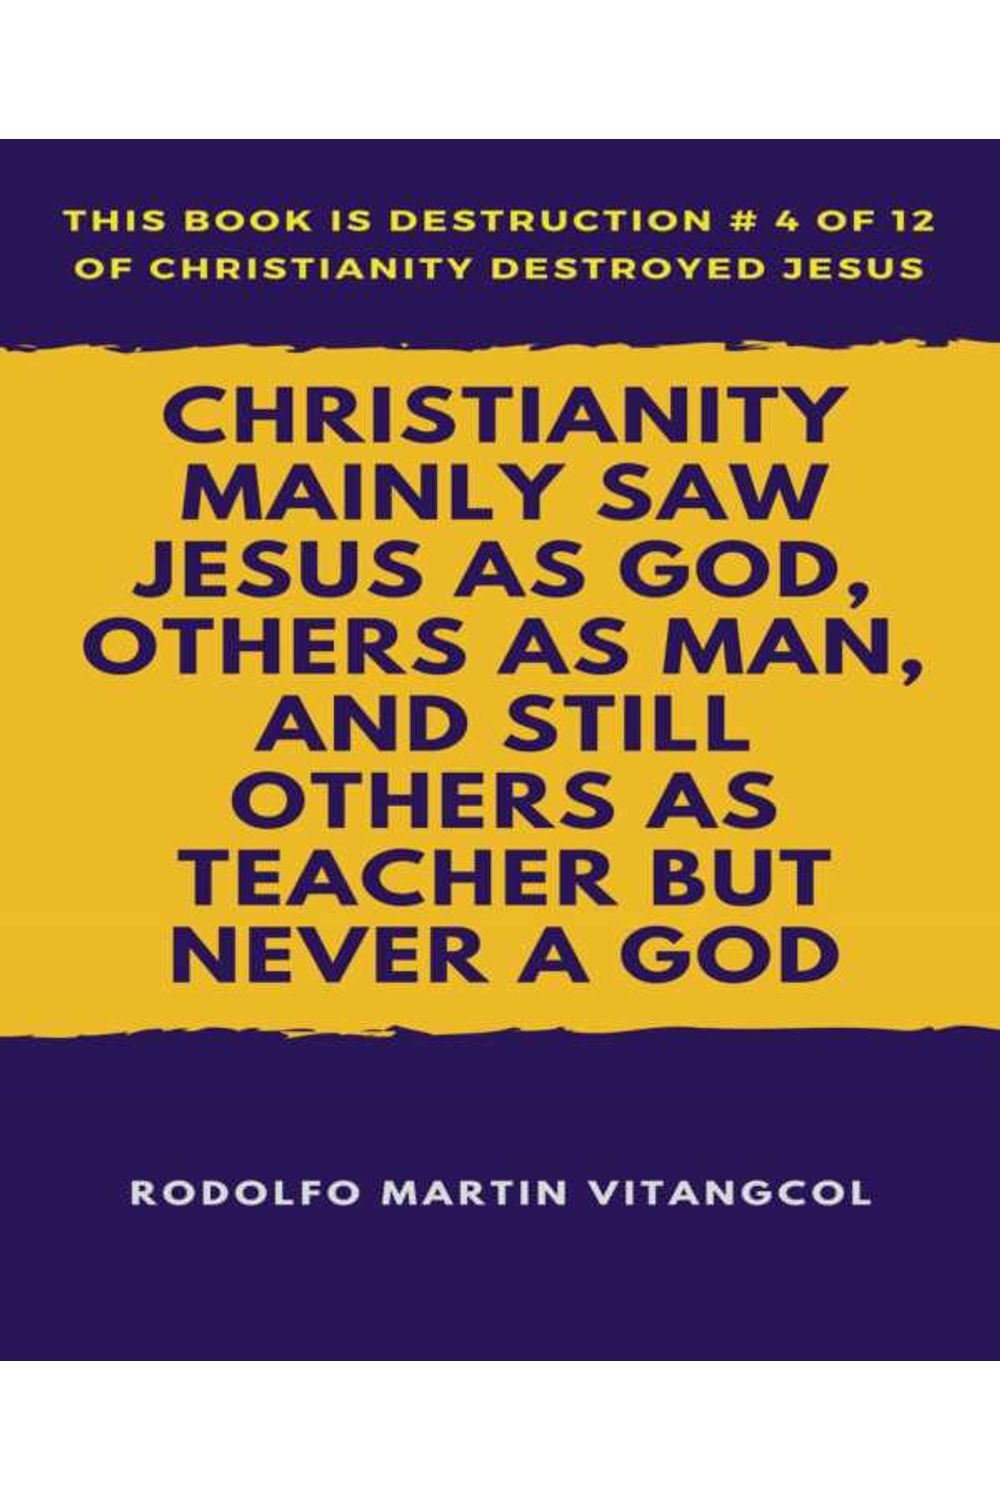 bw-christianity-mainly-saw-jesus-as-god-others-as-man-and-still-others-as-teacher-but-never-a-god-bookrix-9783743894655